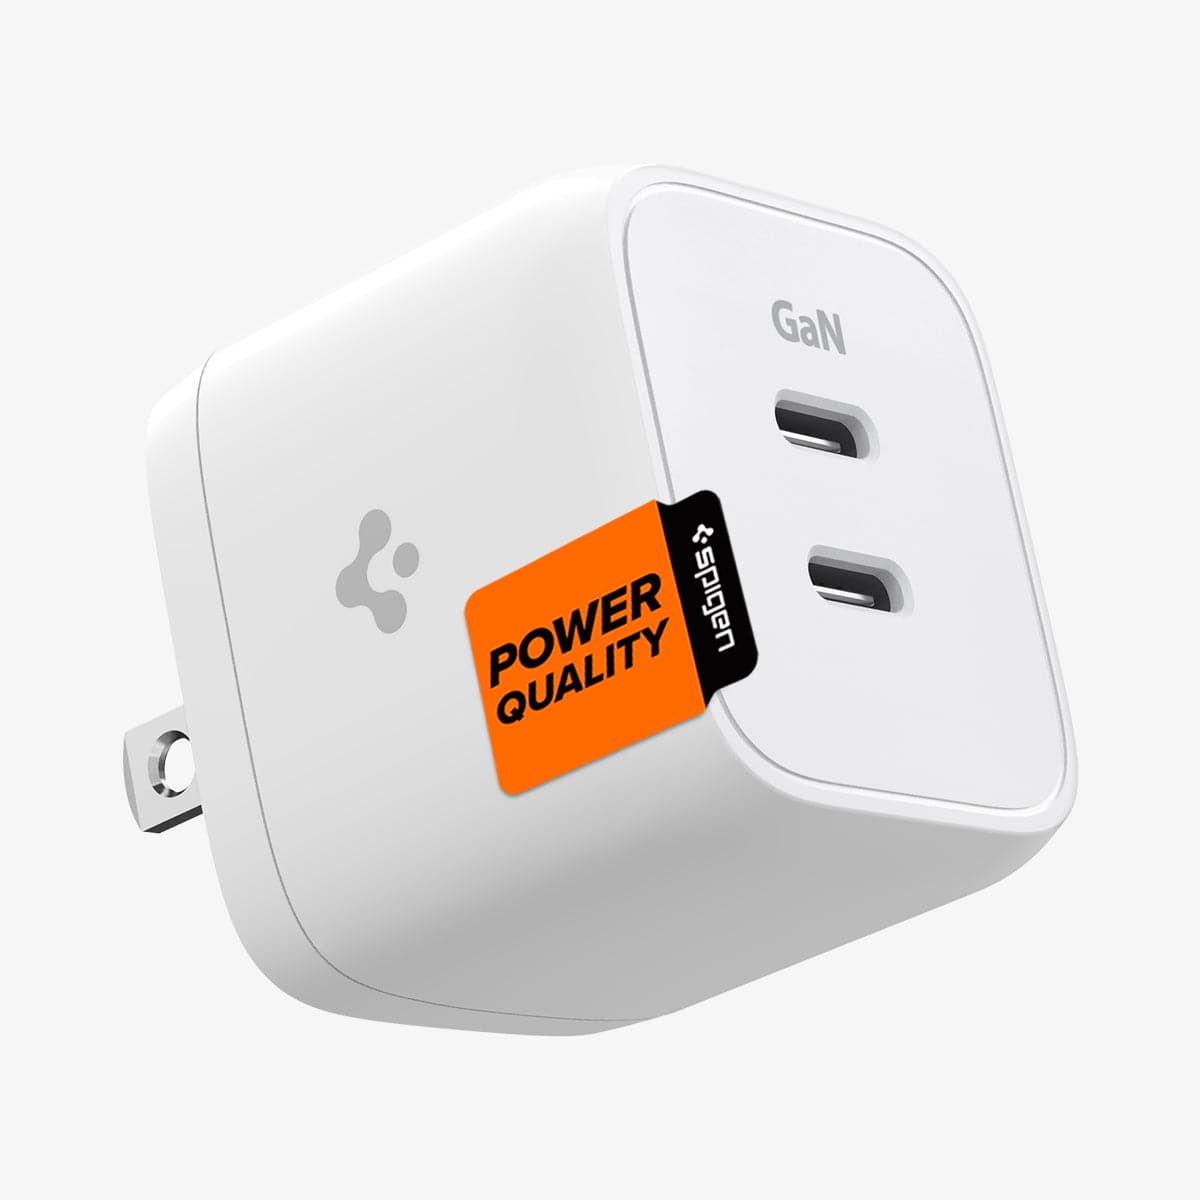 ACH03713 - ArcStation™ Pro GaN 352 Dual USB-C Wall Charger in white showing the side and front with power quality sticker